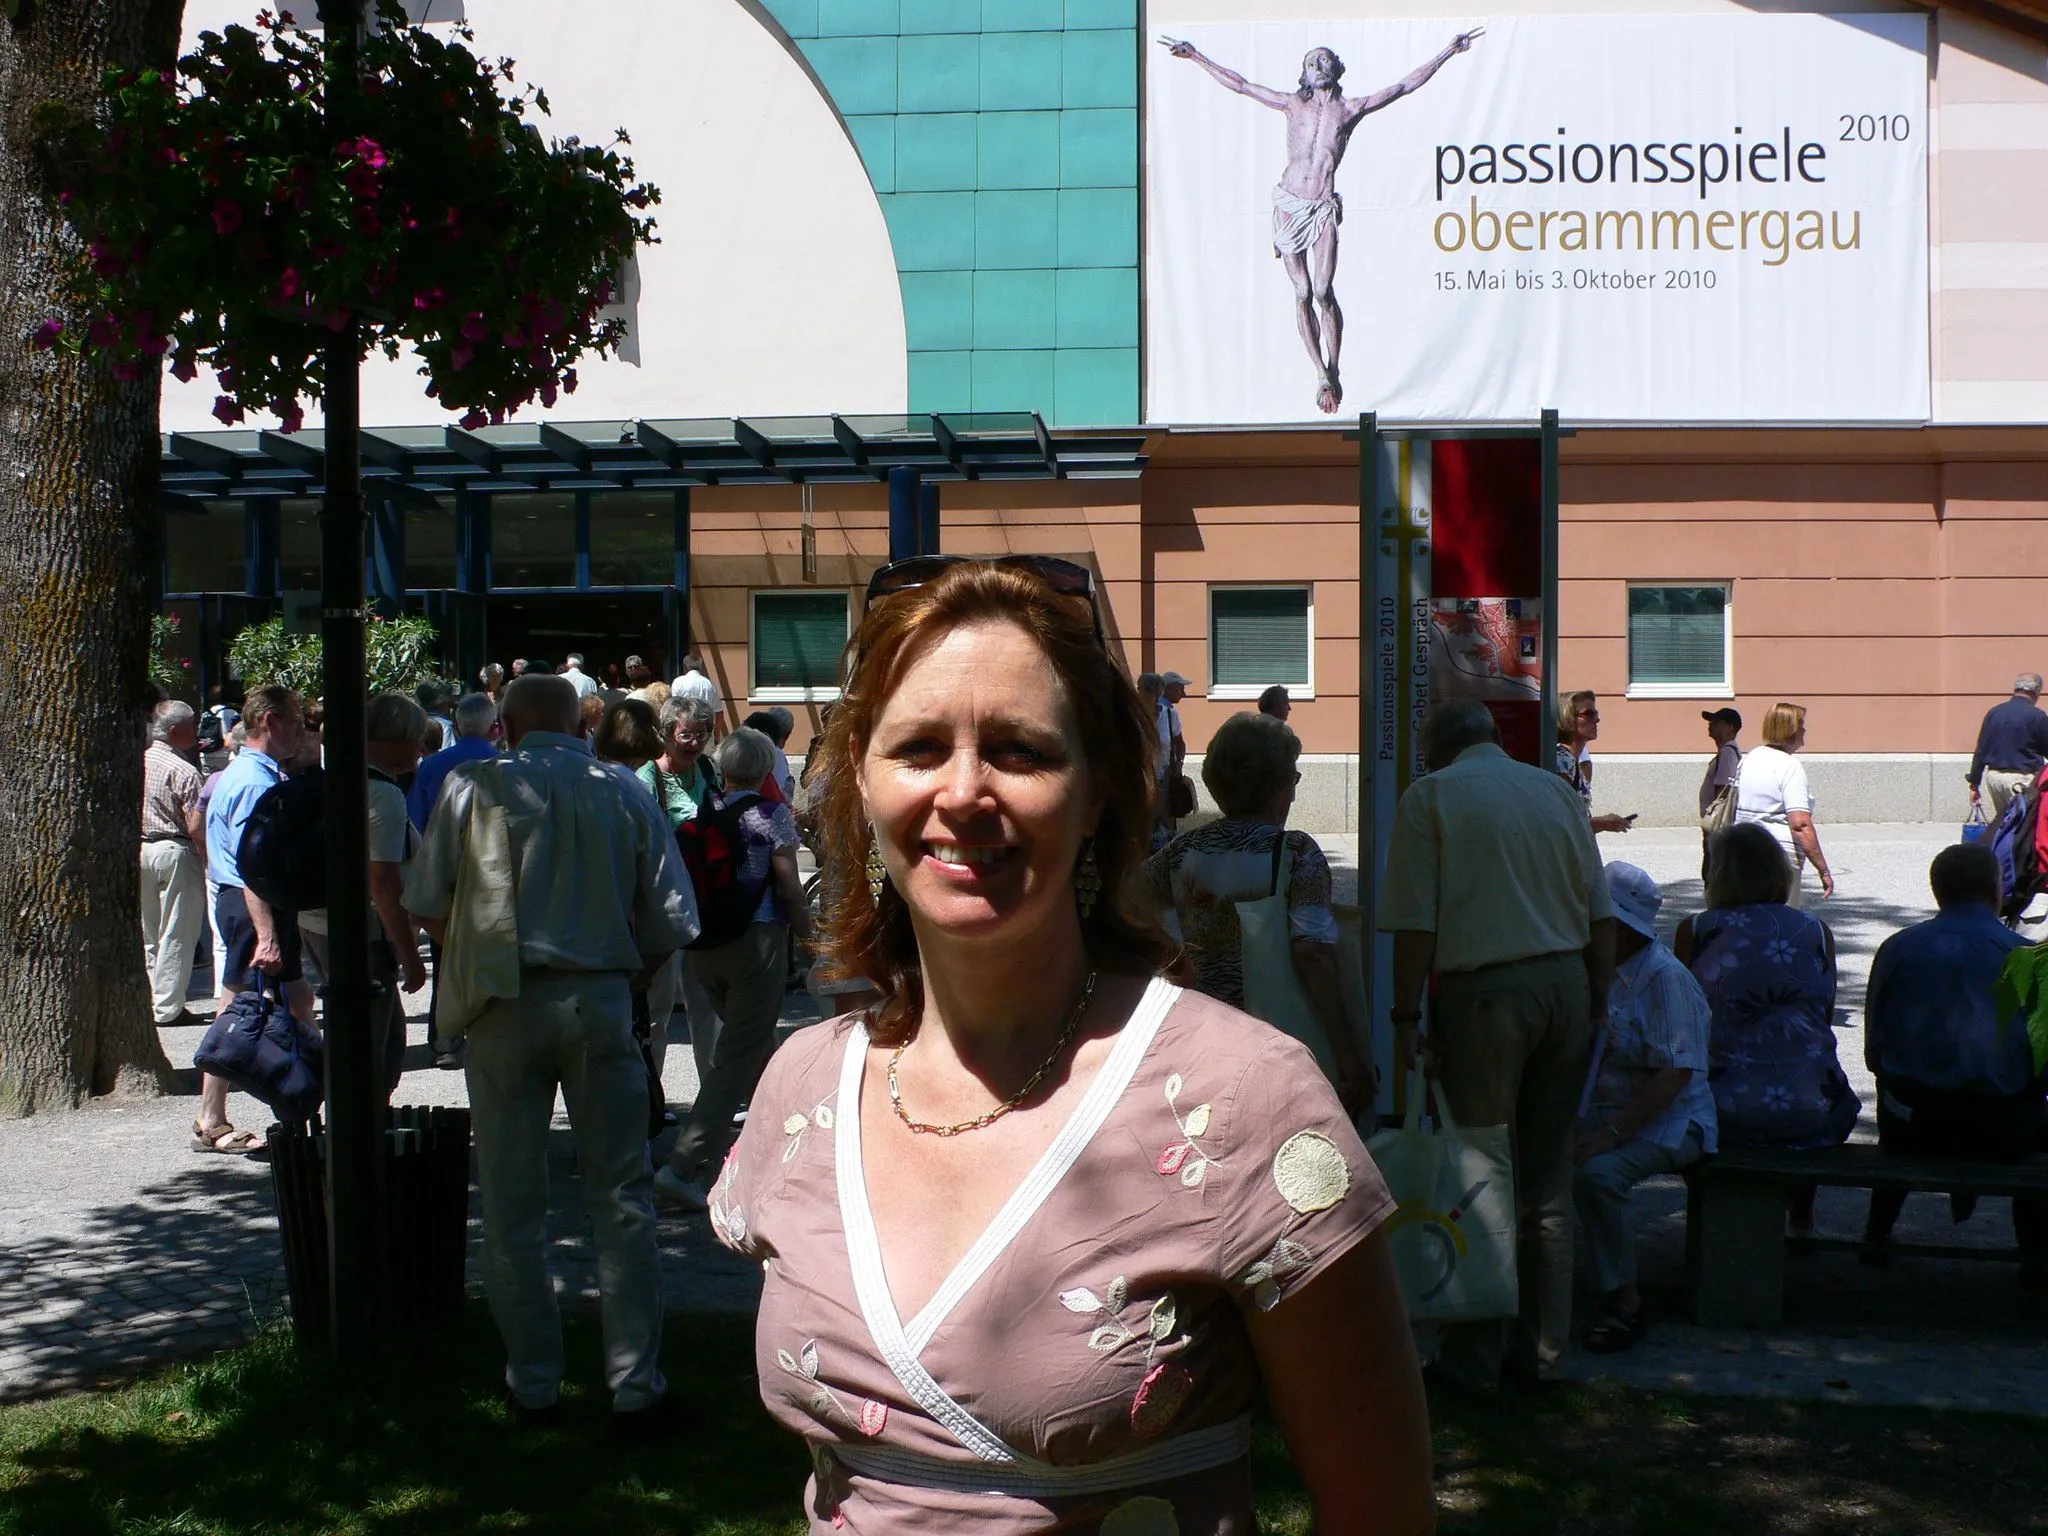 Visiting the Oberammergau Passion Play in 2010